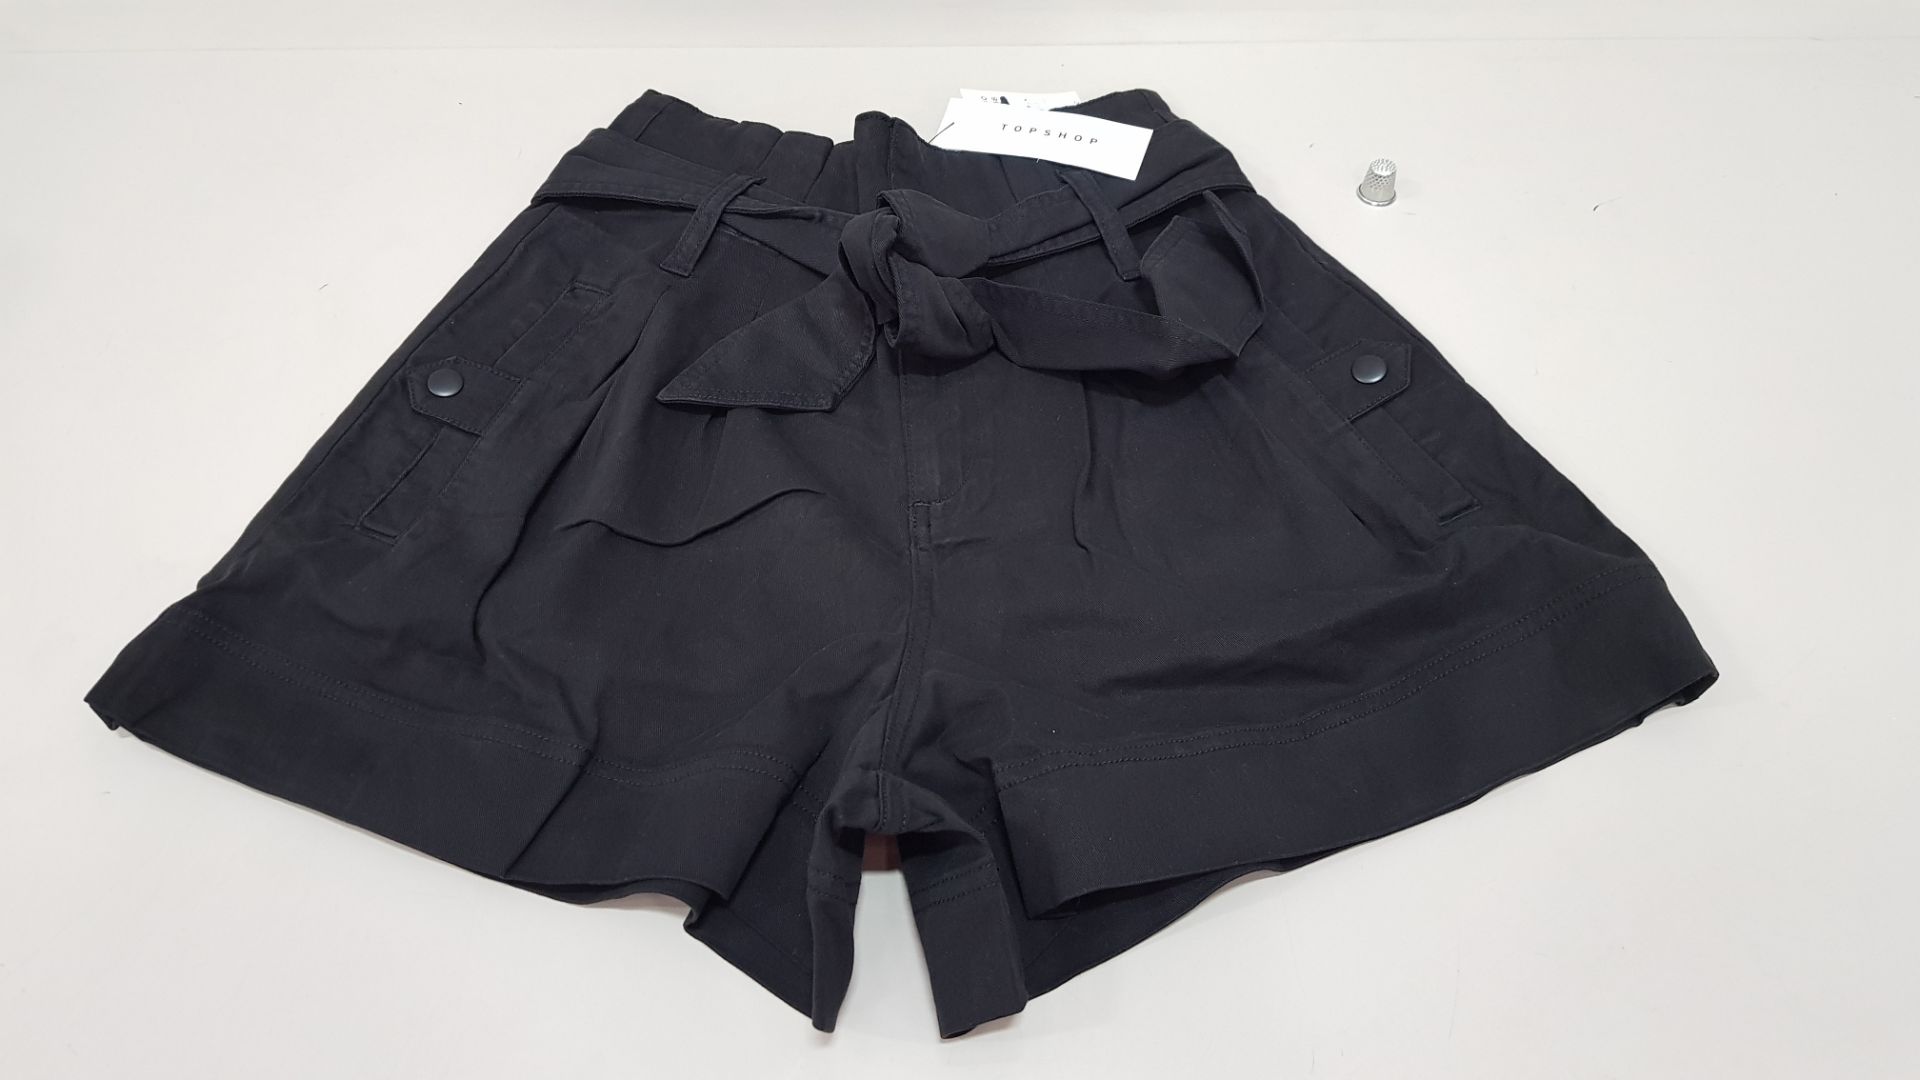 15 X BRAND NEW TOPSHOP SHORTS UK SIZE 10 RRP £29.00 (TOTAL RRP £435.00)